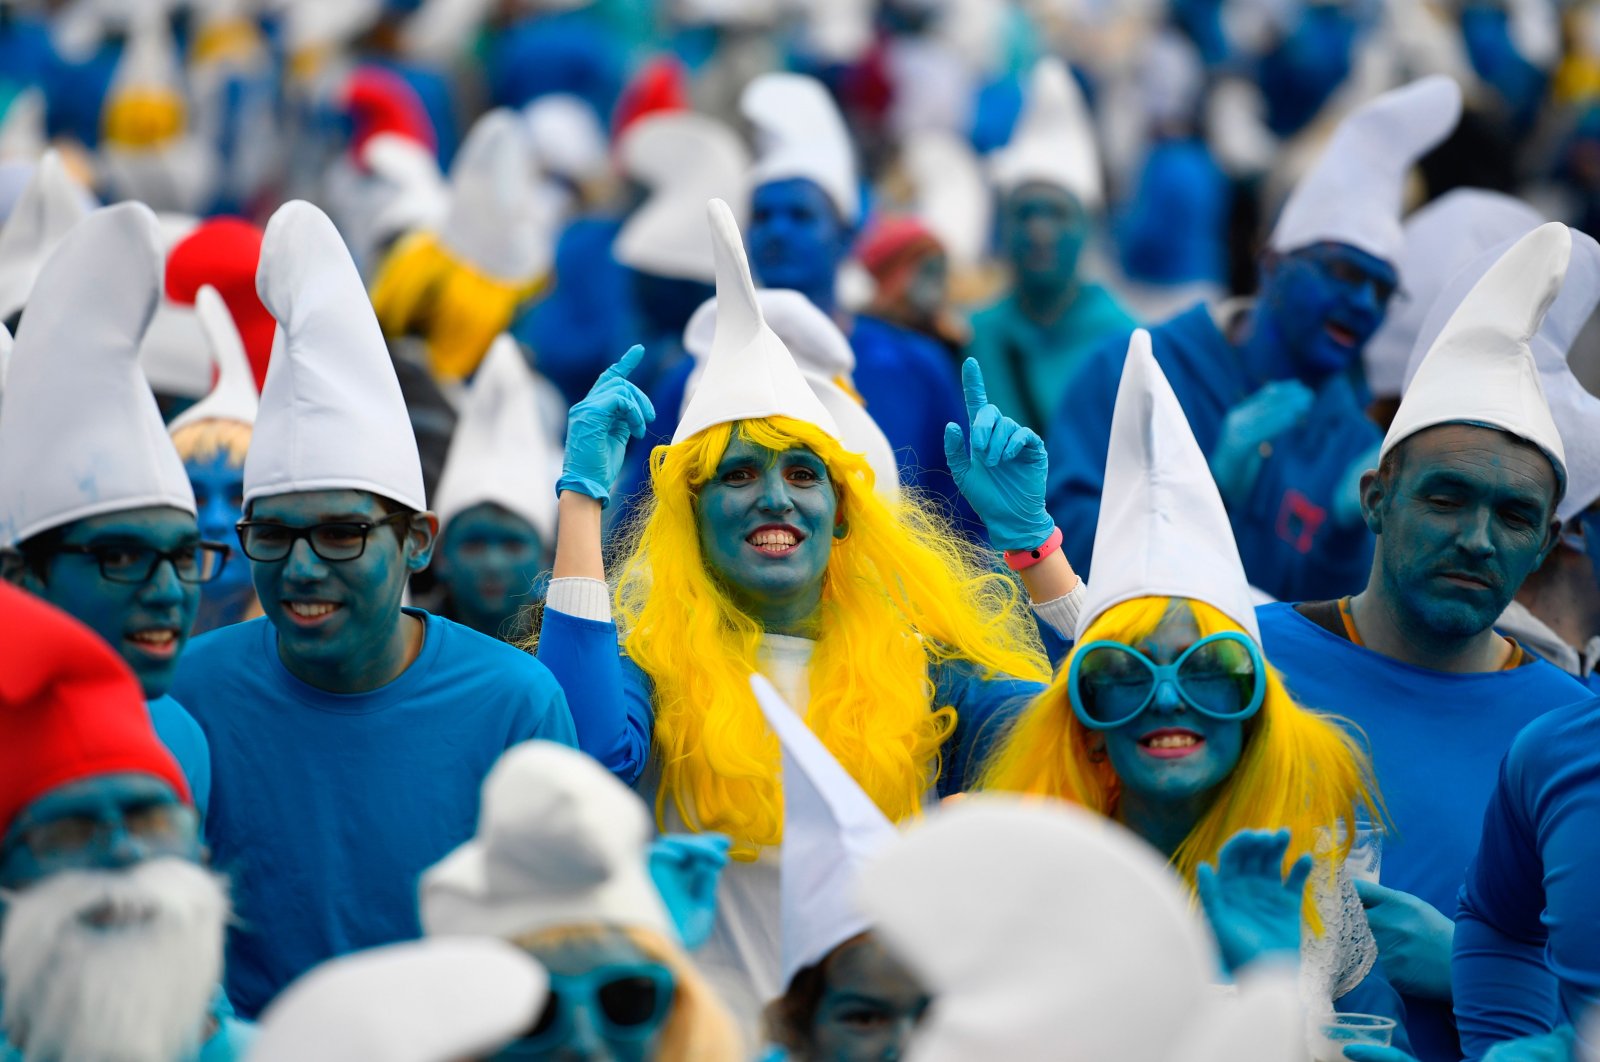 People dressed as Smurfs, a Belgian comic franchise centered on a fictional colony of small, blue, human-like creatures who live in mushroom-shaped houses in the forest, attend a world-record gathering of Smurfs on March 7, 2020, in Landerneau, western France. (AFP Photo)